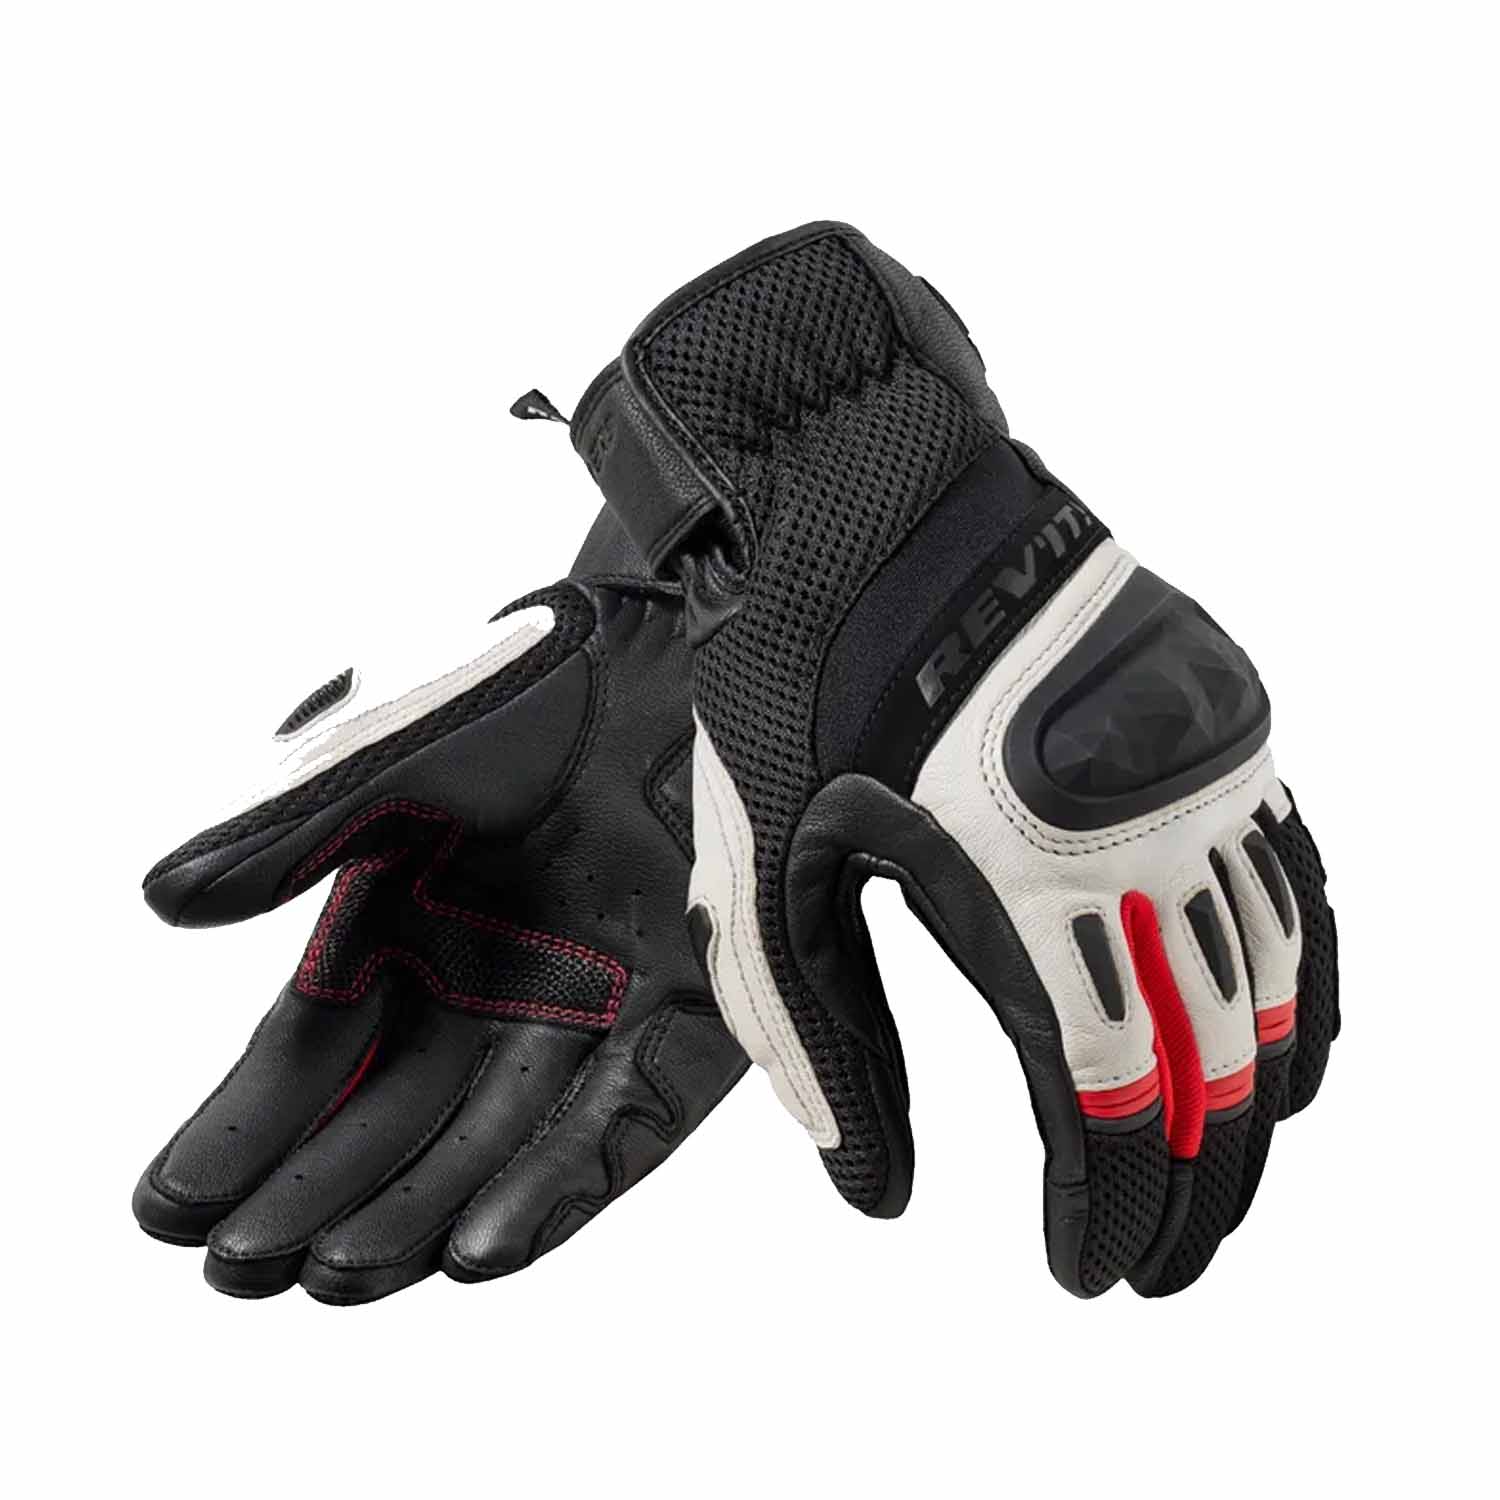 Image of REV'IT! Dirt 4 Gloves Black Red Size M ID 8700001383462